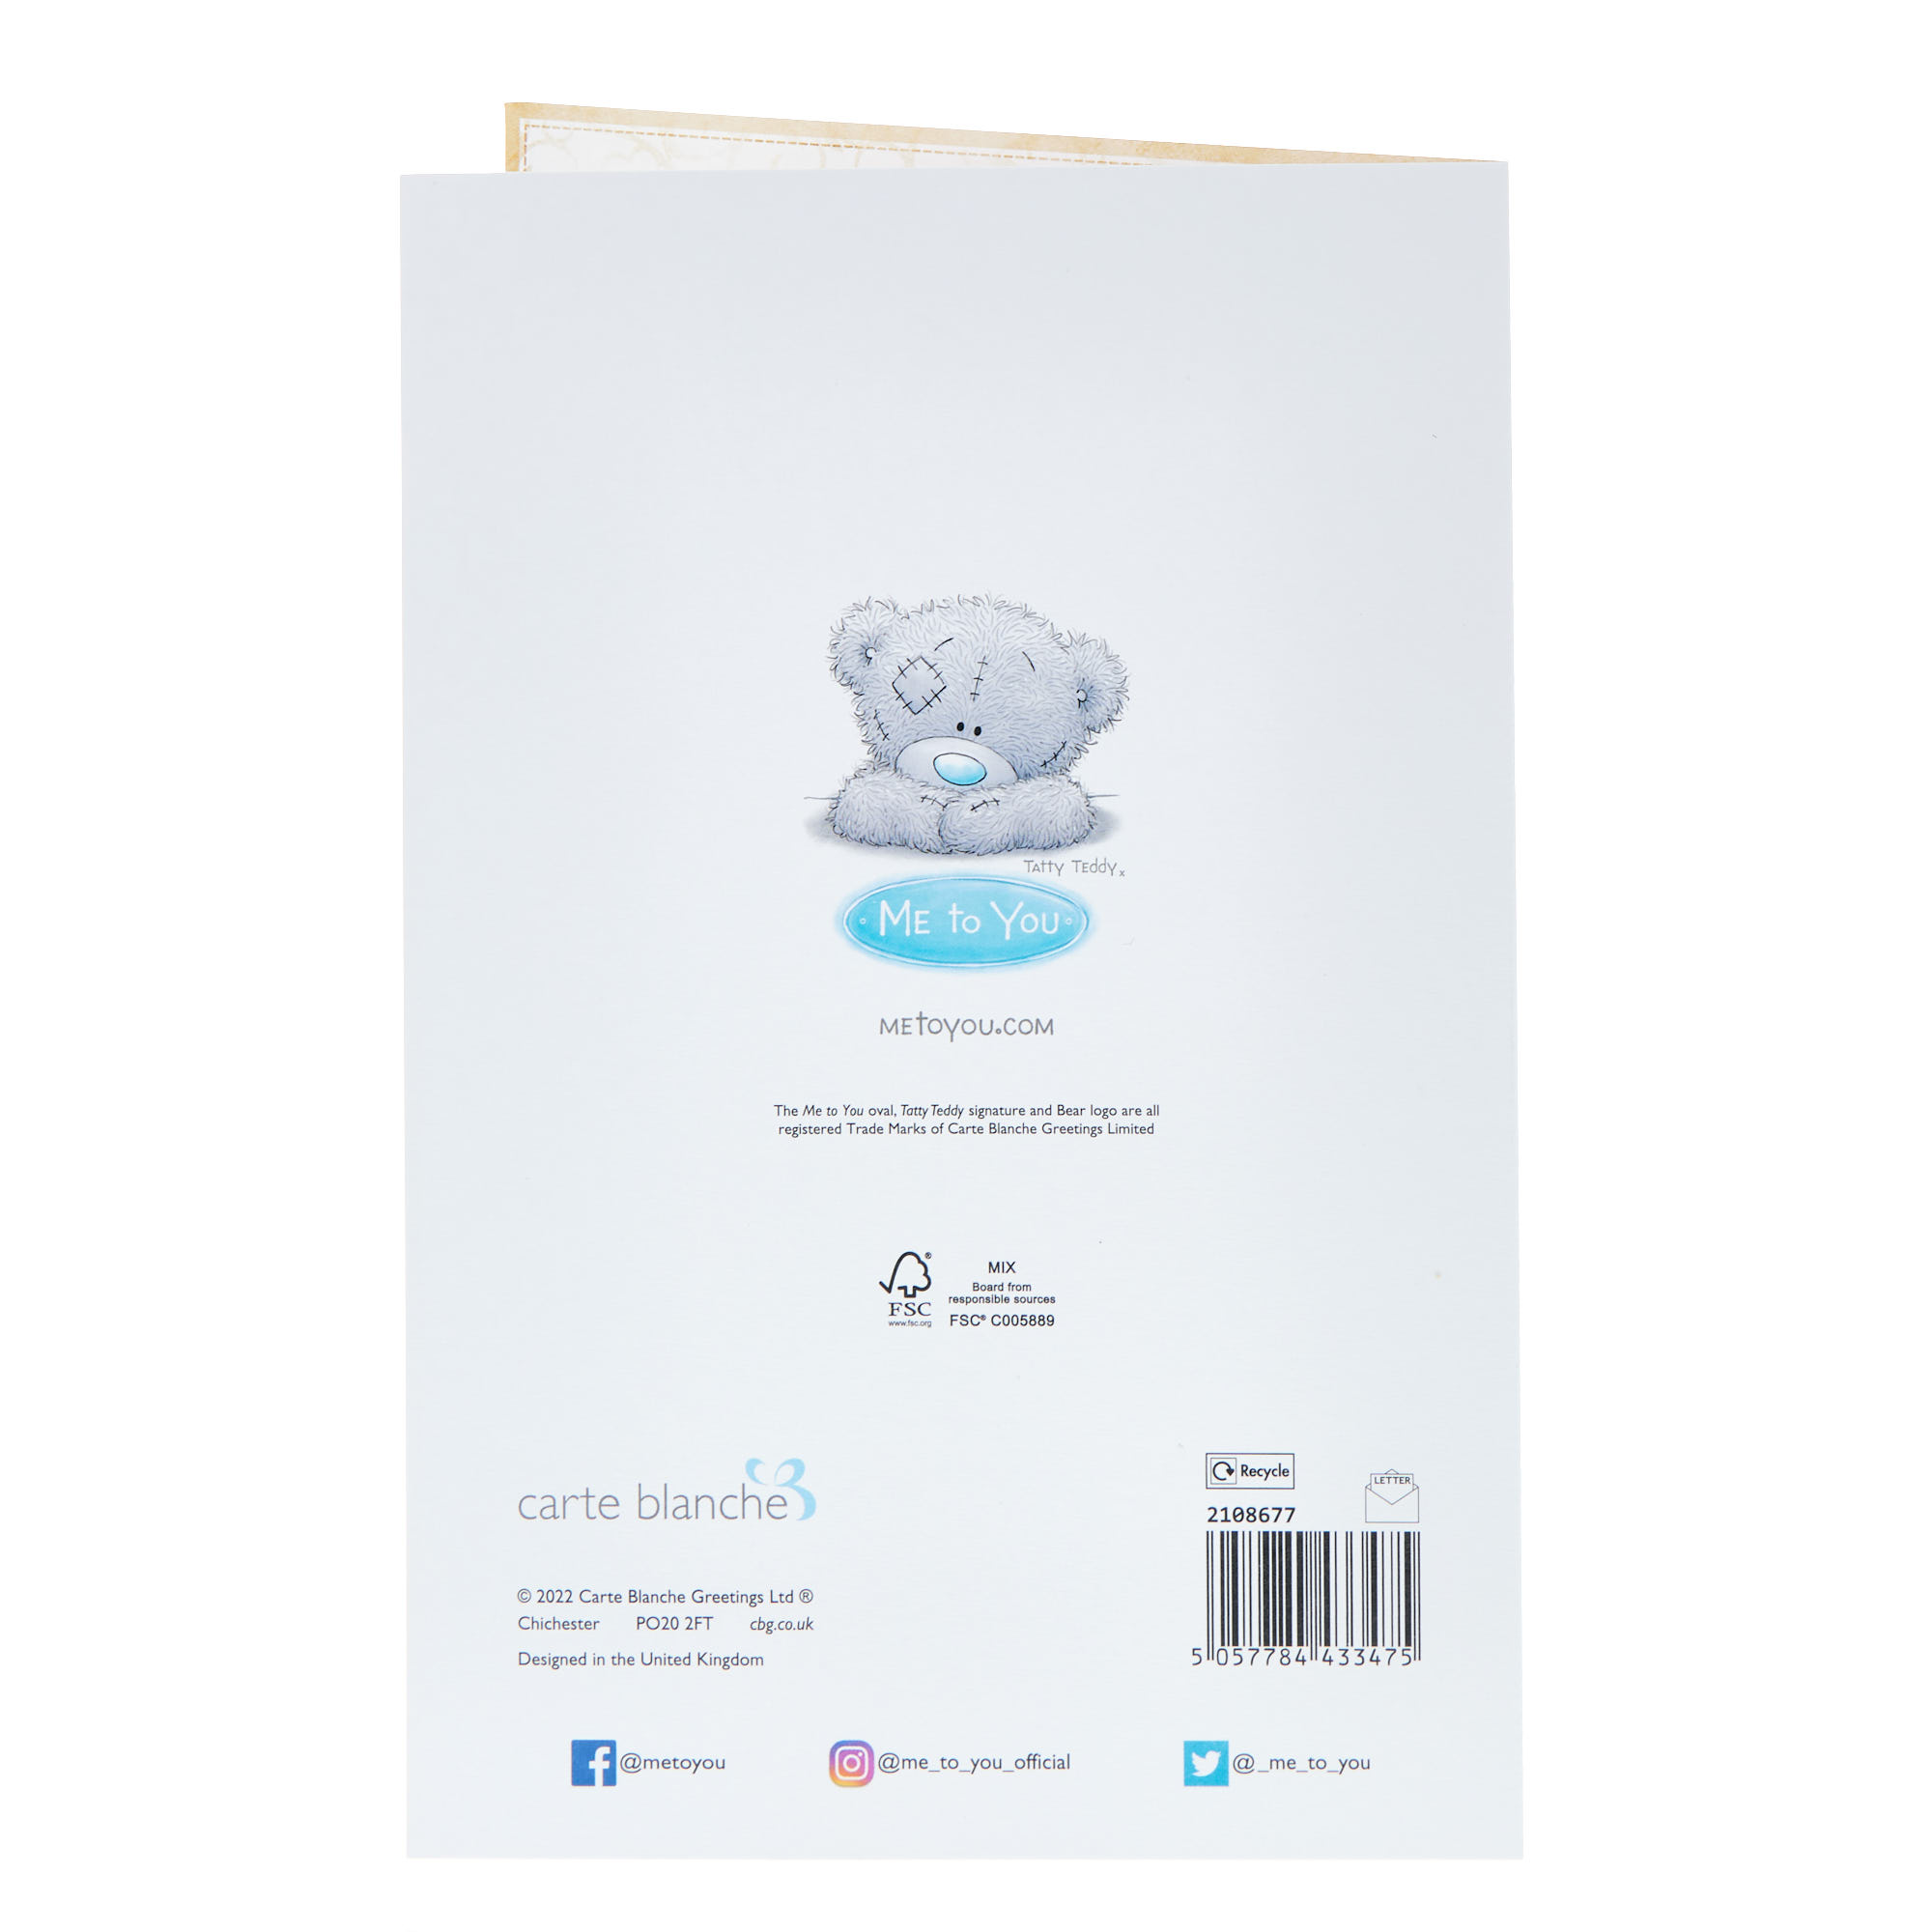 Love Each Moment Me To You Tatty Teddy Anniversary Card